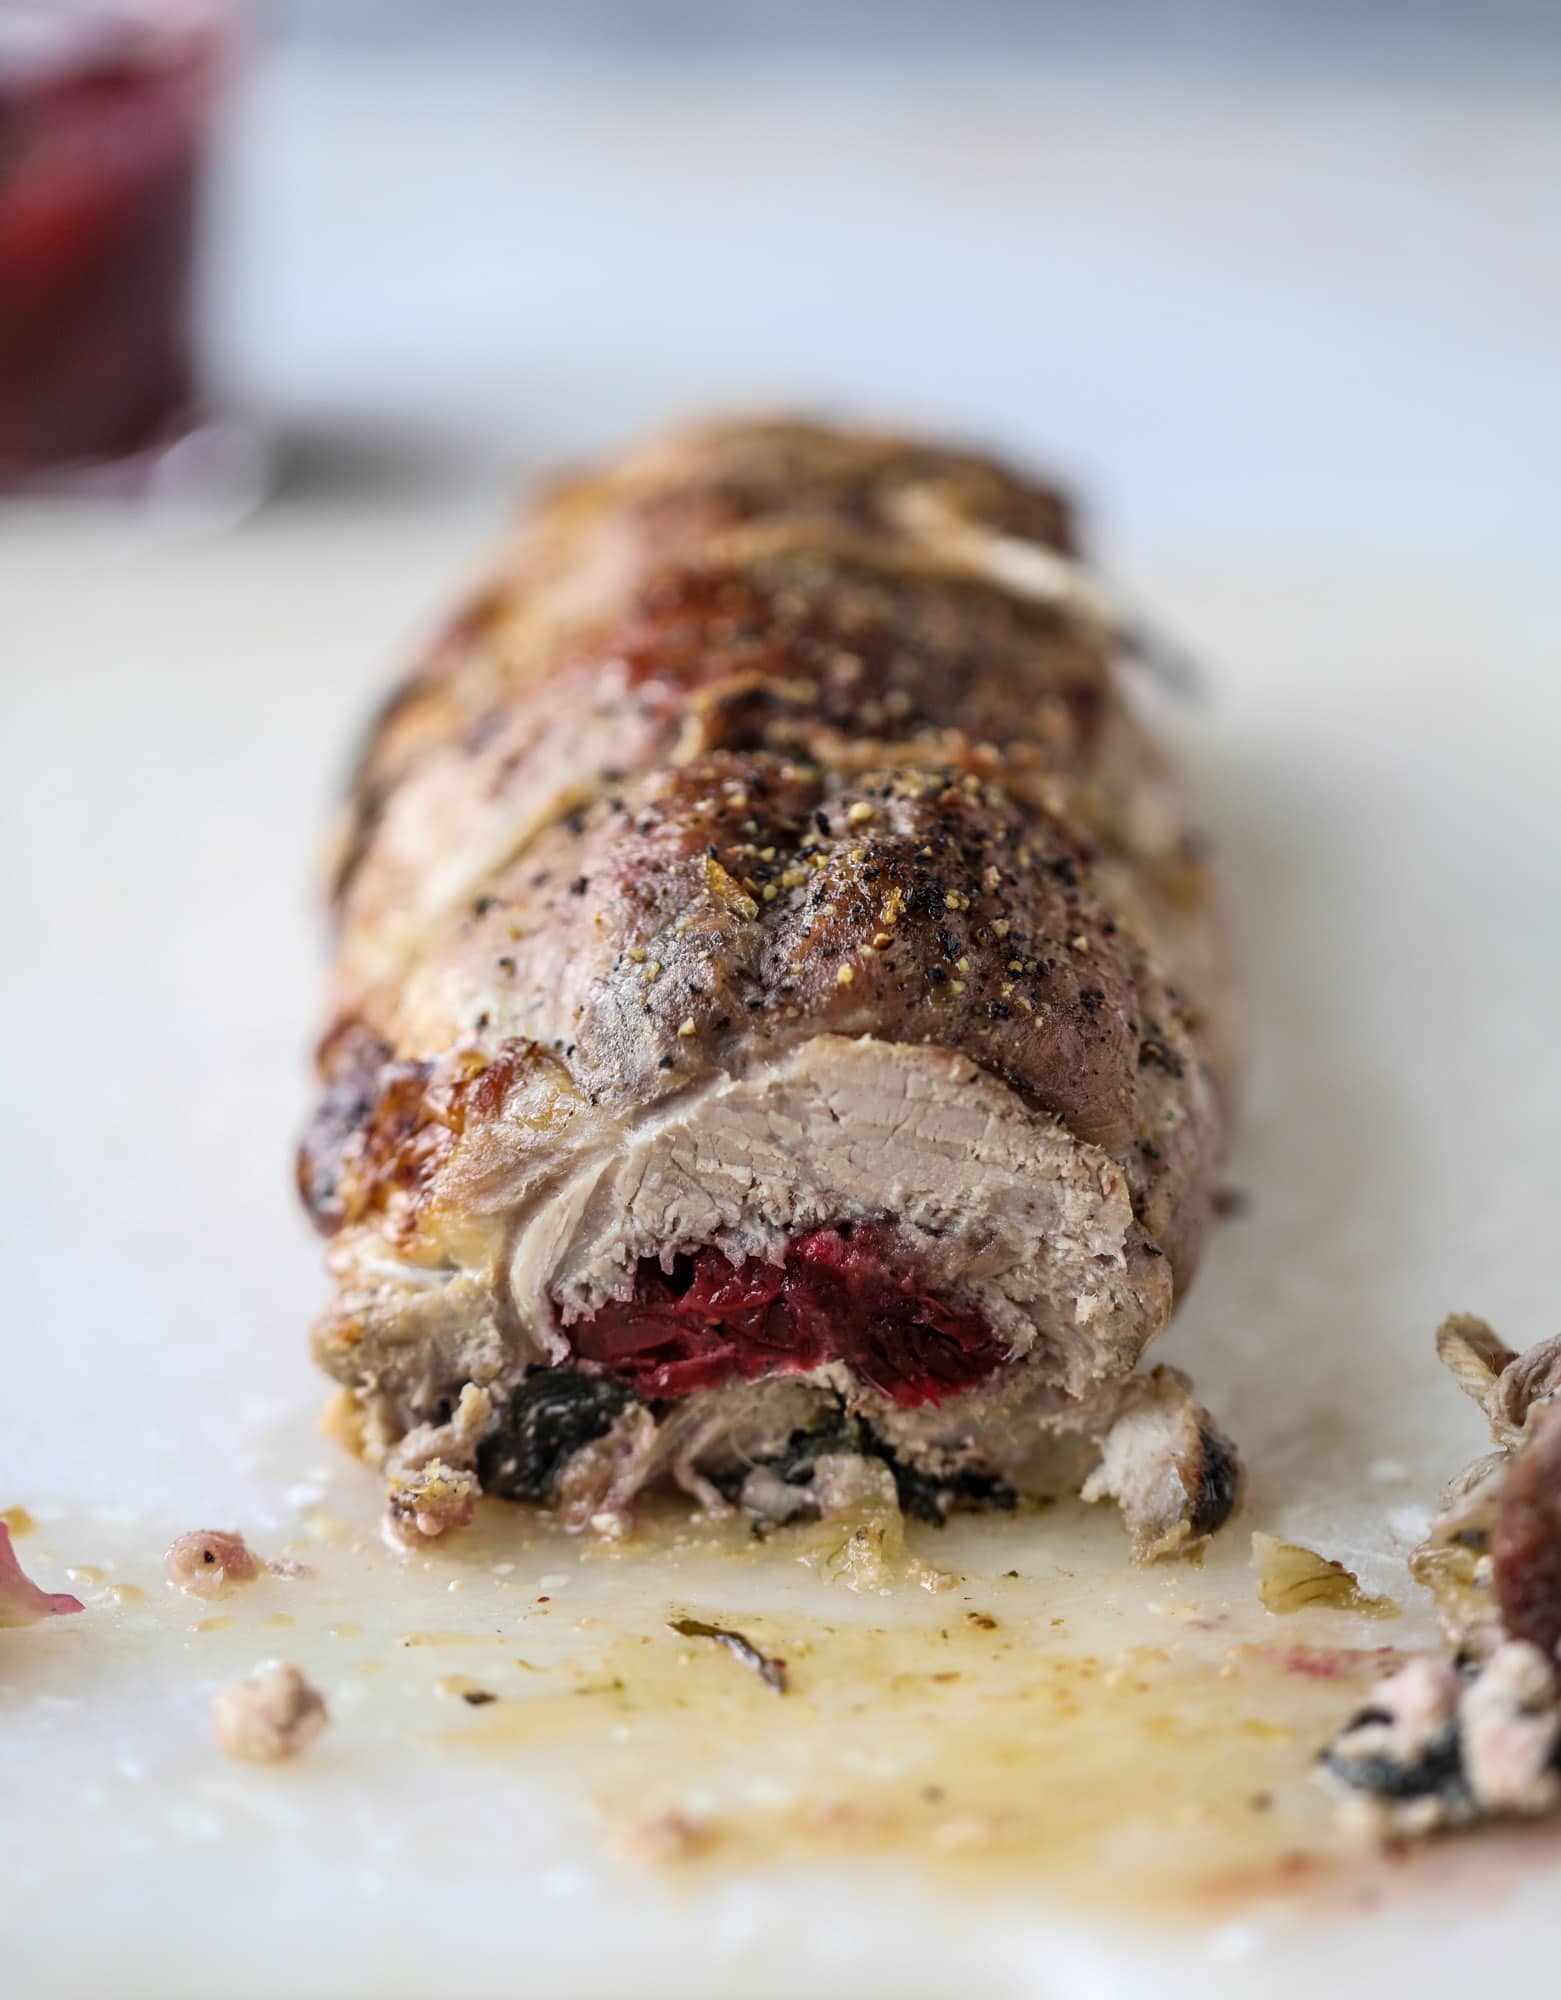 This holiday stuffed pork tenderloin is filled with caramelized onion, fresh cranberry sauce, goat cheese and fresh spinach. It's a show stopped and super delicious, along with being fairly simple to make! I howsweeteats.com #stuffed #porktenderloin